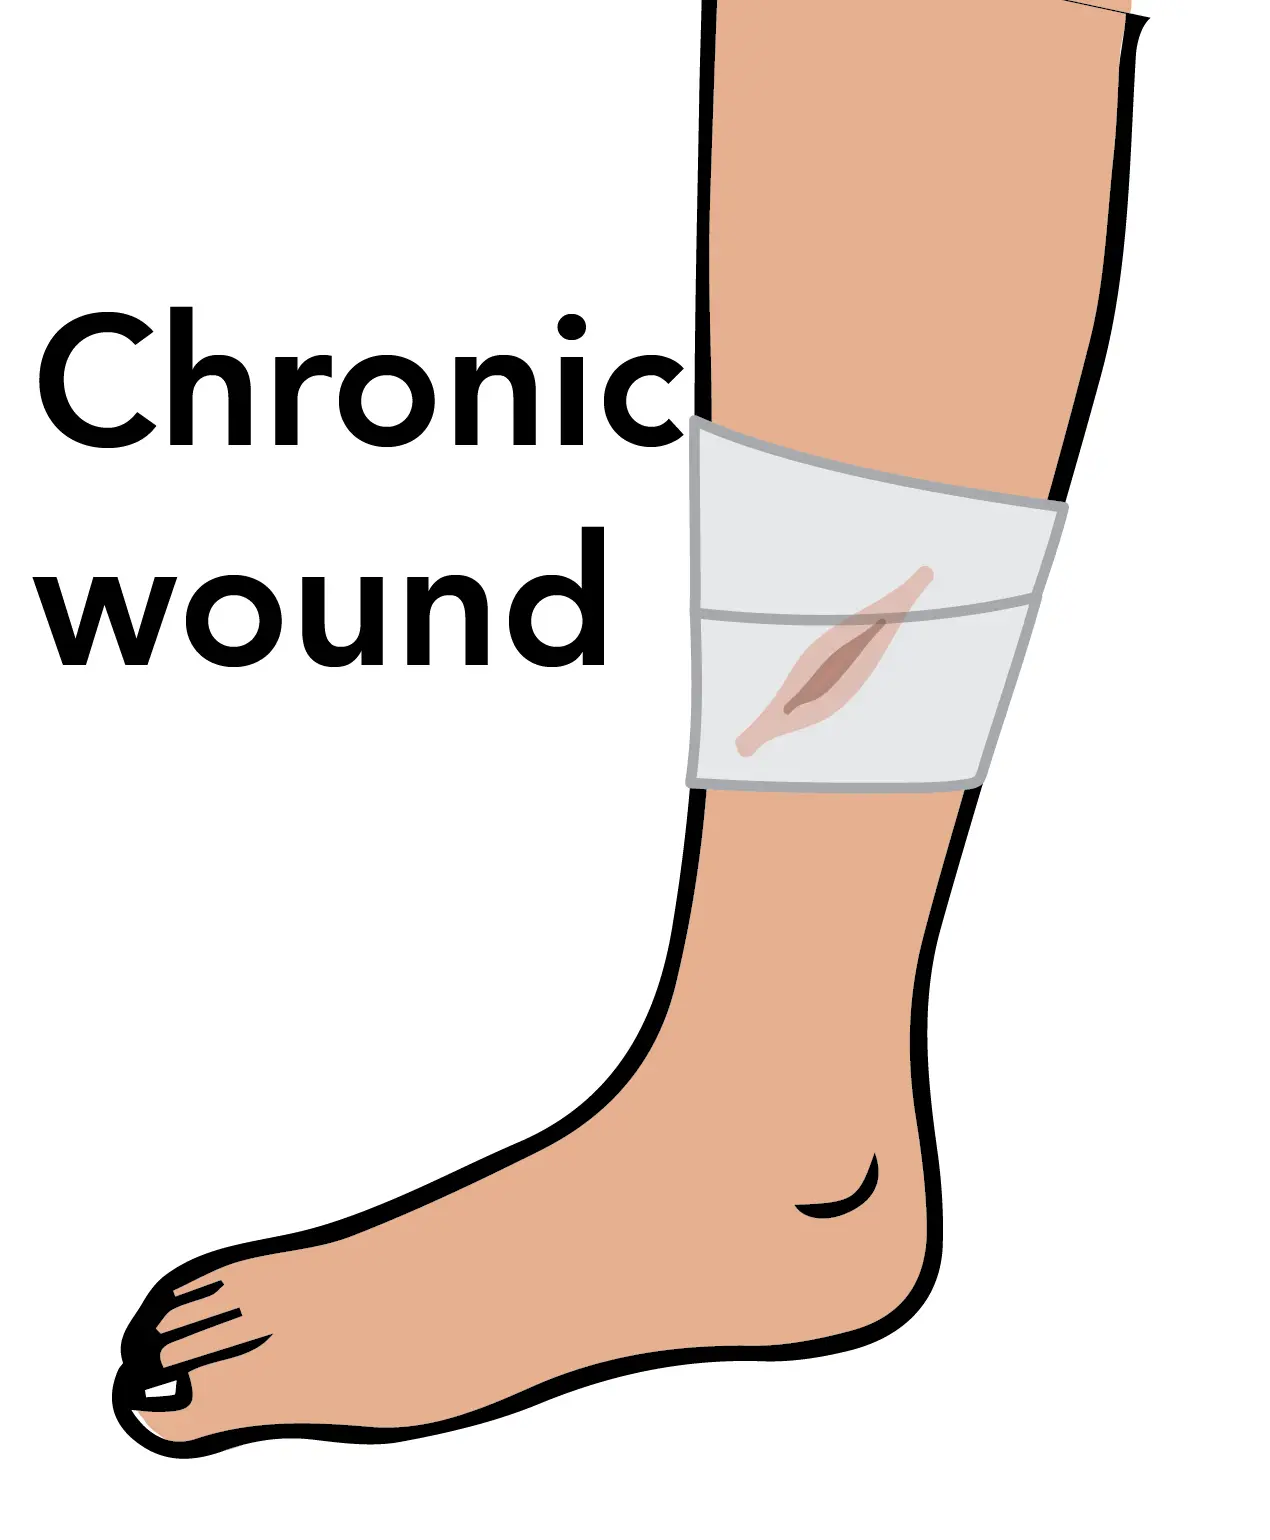 Chronic wounds often have a characteristic microbiome.